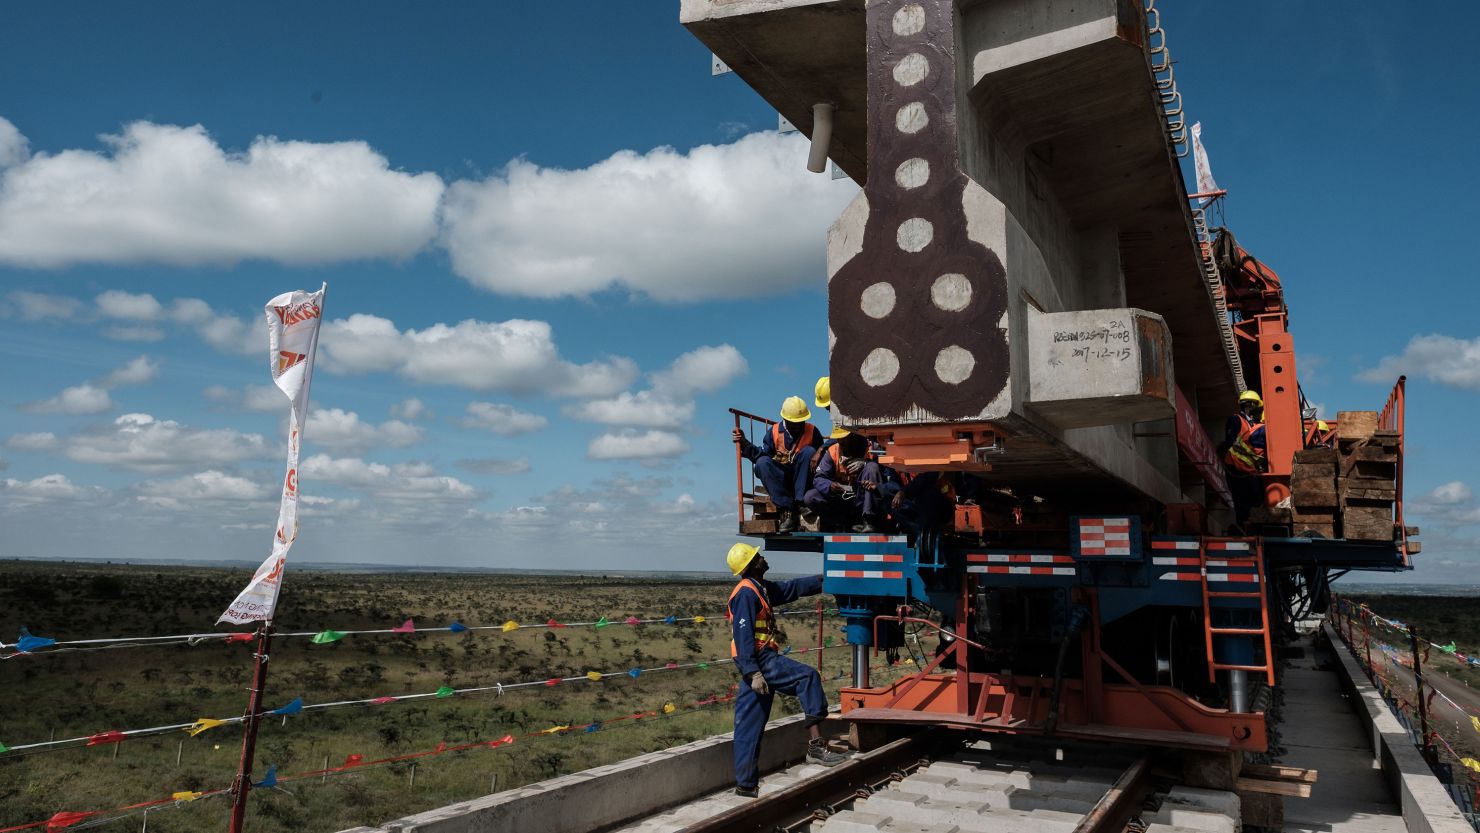 A railway track at the construction site of a Standard Gauge Railway project in Nairobi, Kenya, a signature project of China's Belt and Road Initiative.